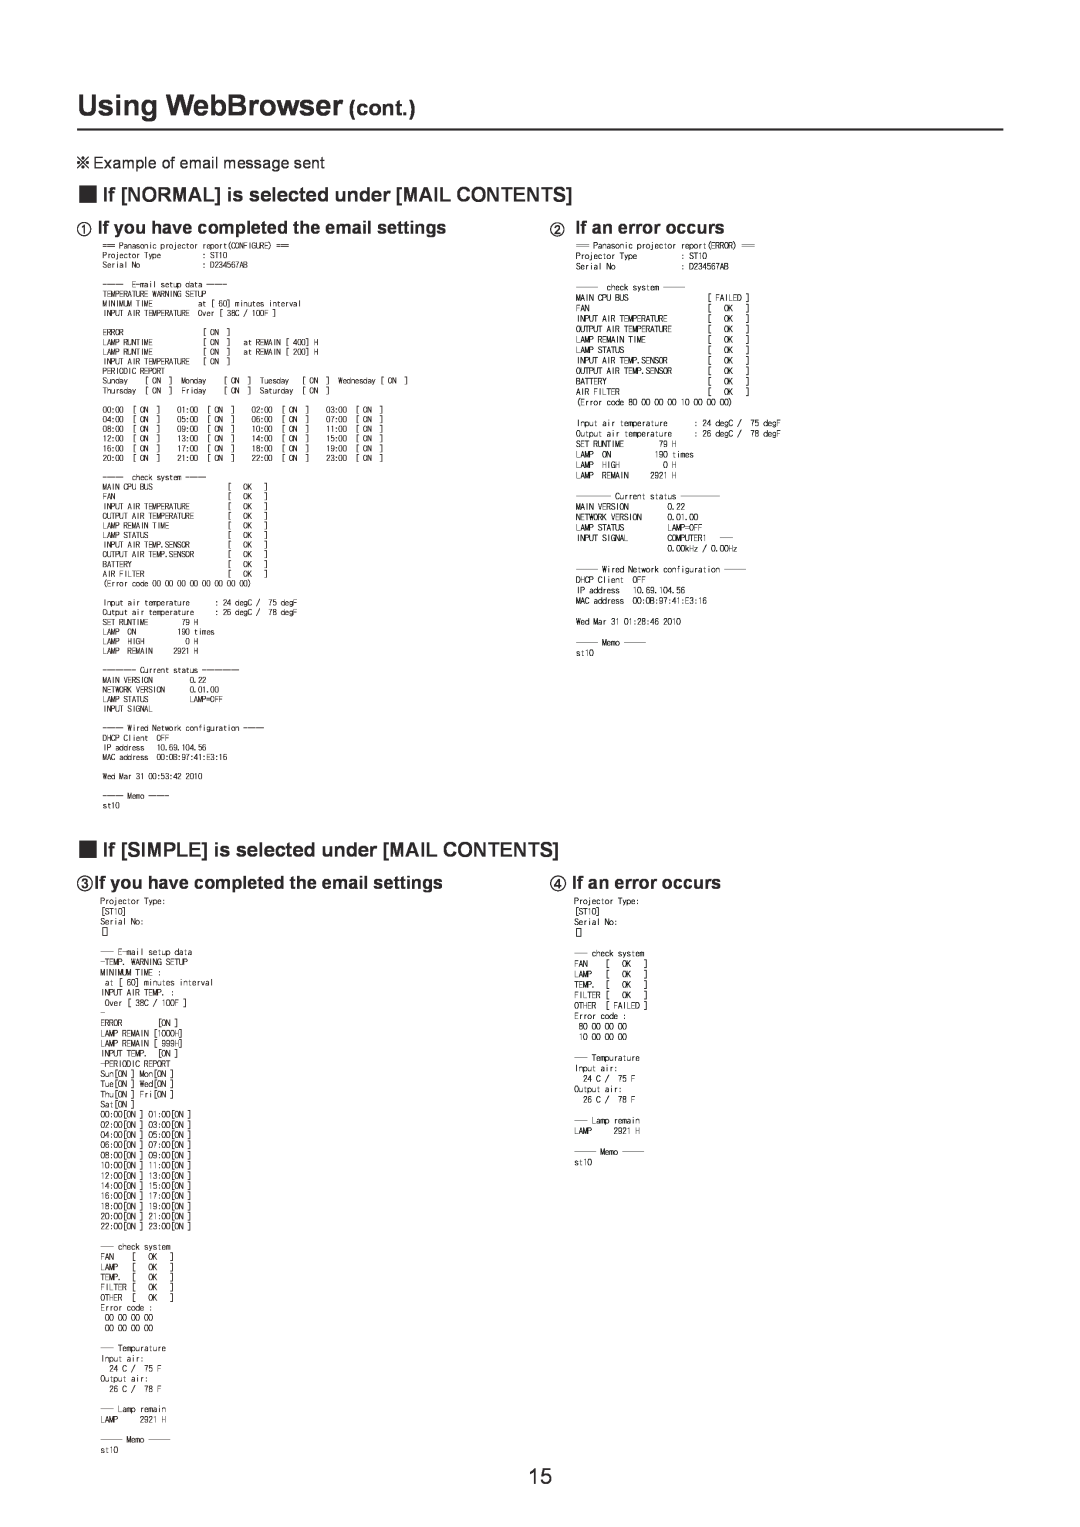 Panasonic PT-ST10E, TQBH0228 manual Using WebBrowser cont, „„If NORMAL is selected under MAIL CONTENTS, If an error occurs 